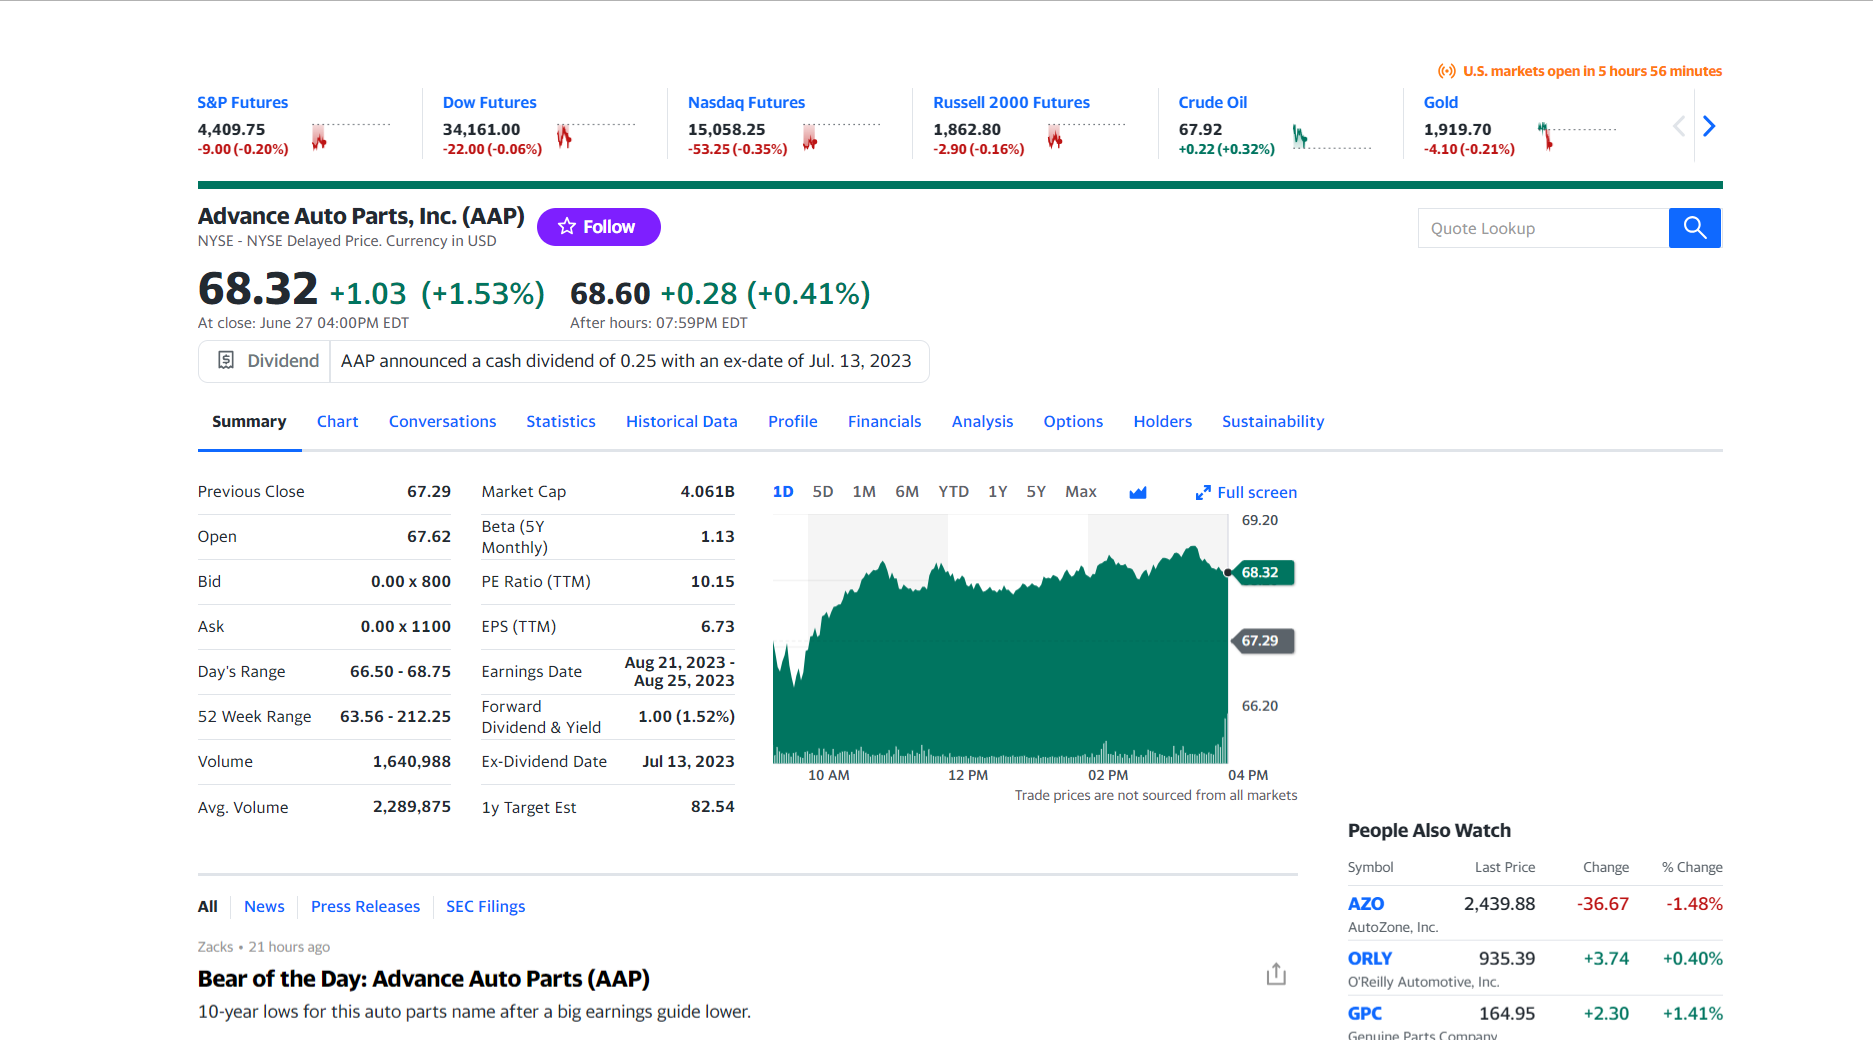 How to Scrape Yahoo Finance: Stock Prices, Bids, Price Change and more